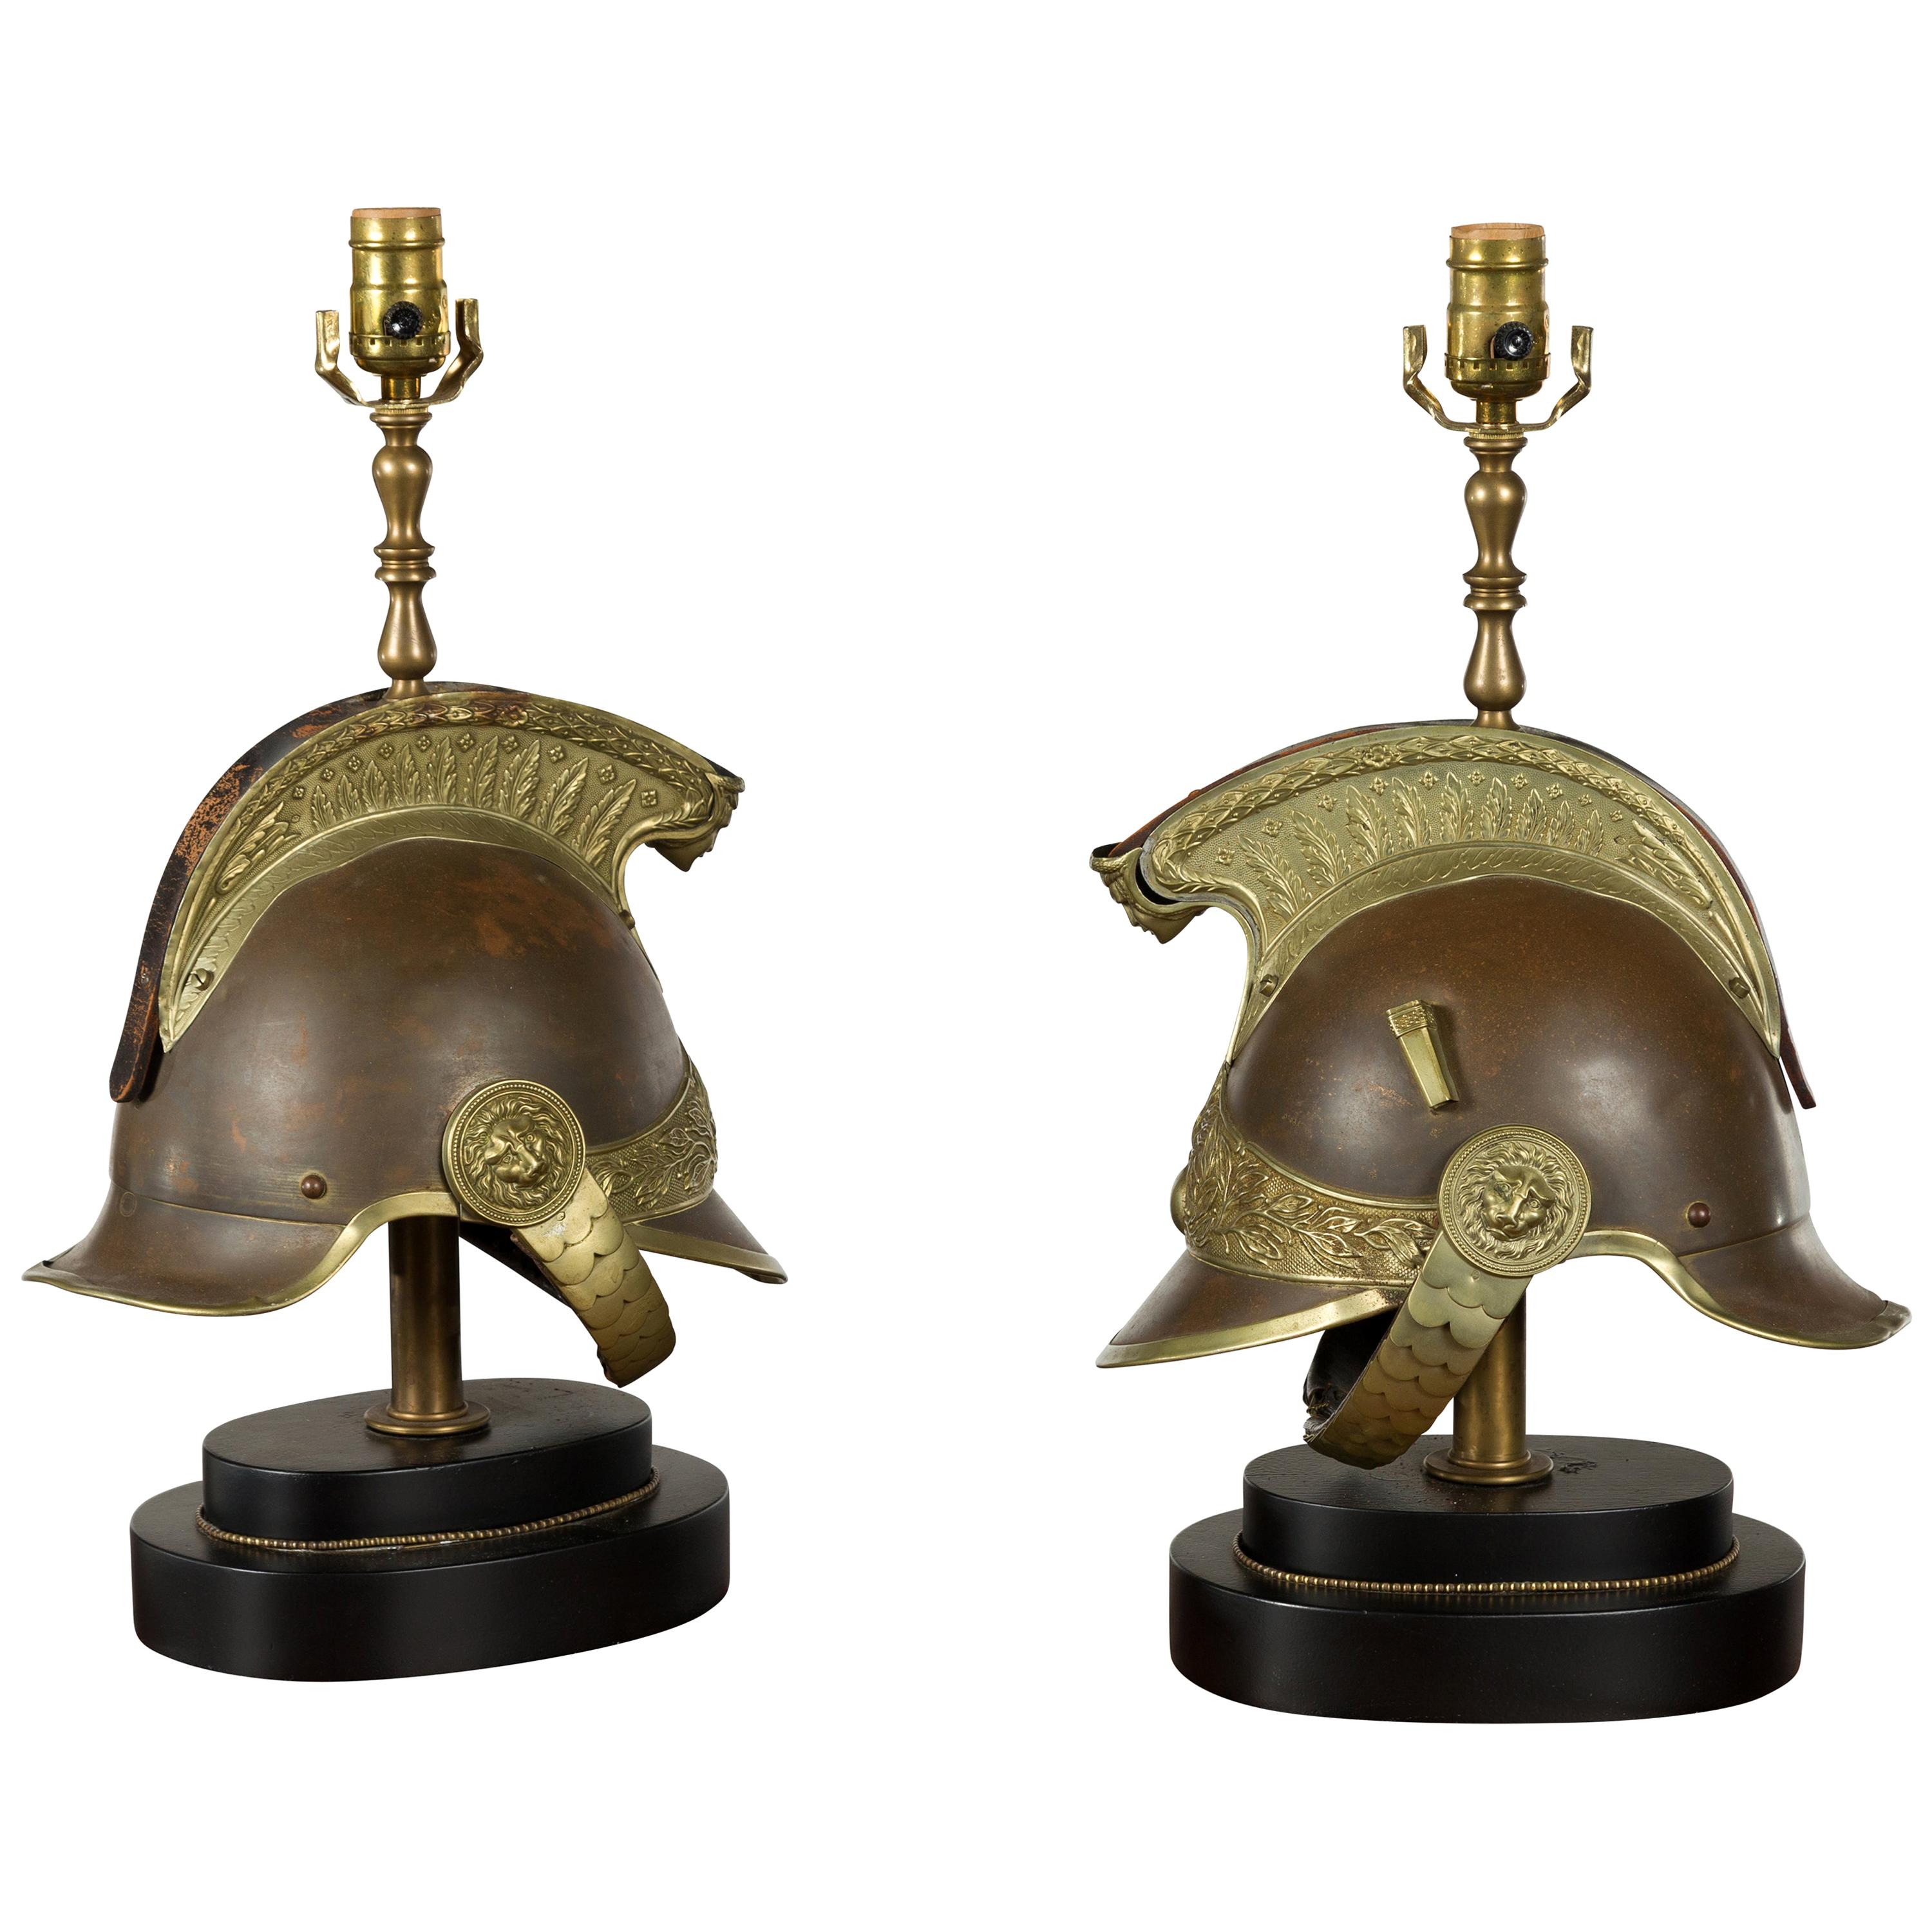 Pair of 1880s Brass Legionary Helmets Mounted as Table Lamps on Bases